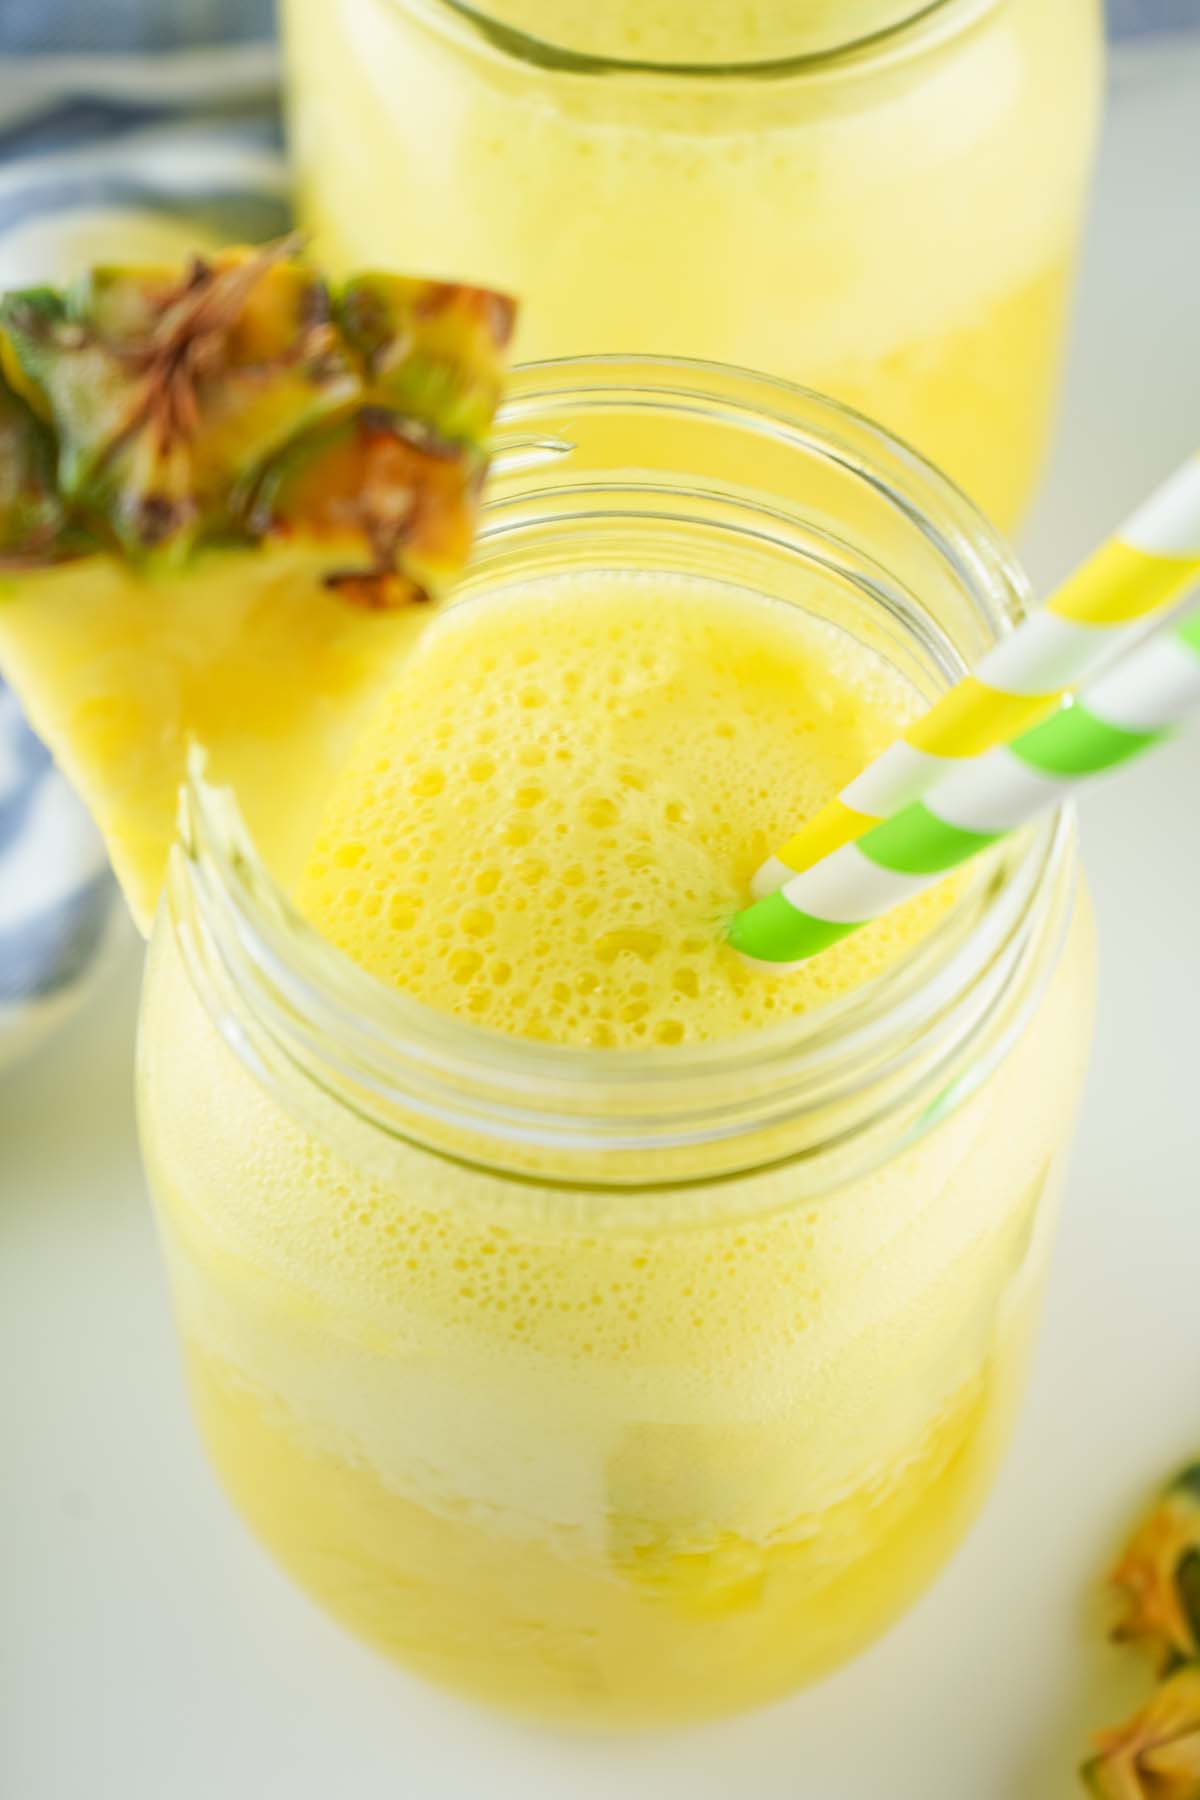 Top view of pineapple water in a glass with two straws.